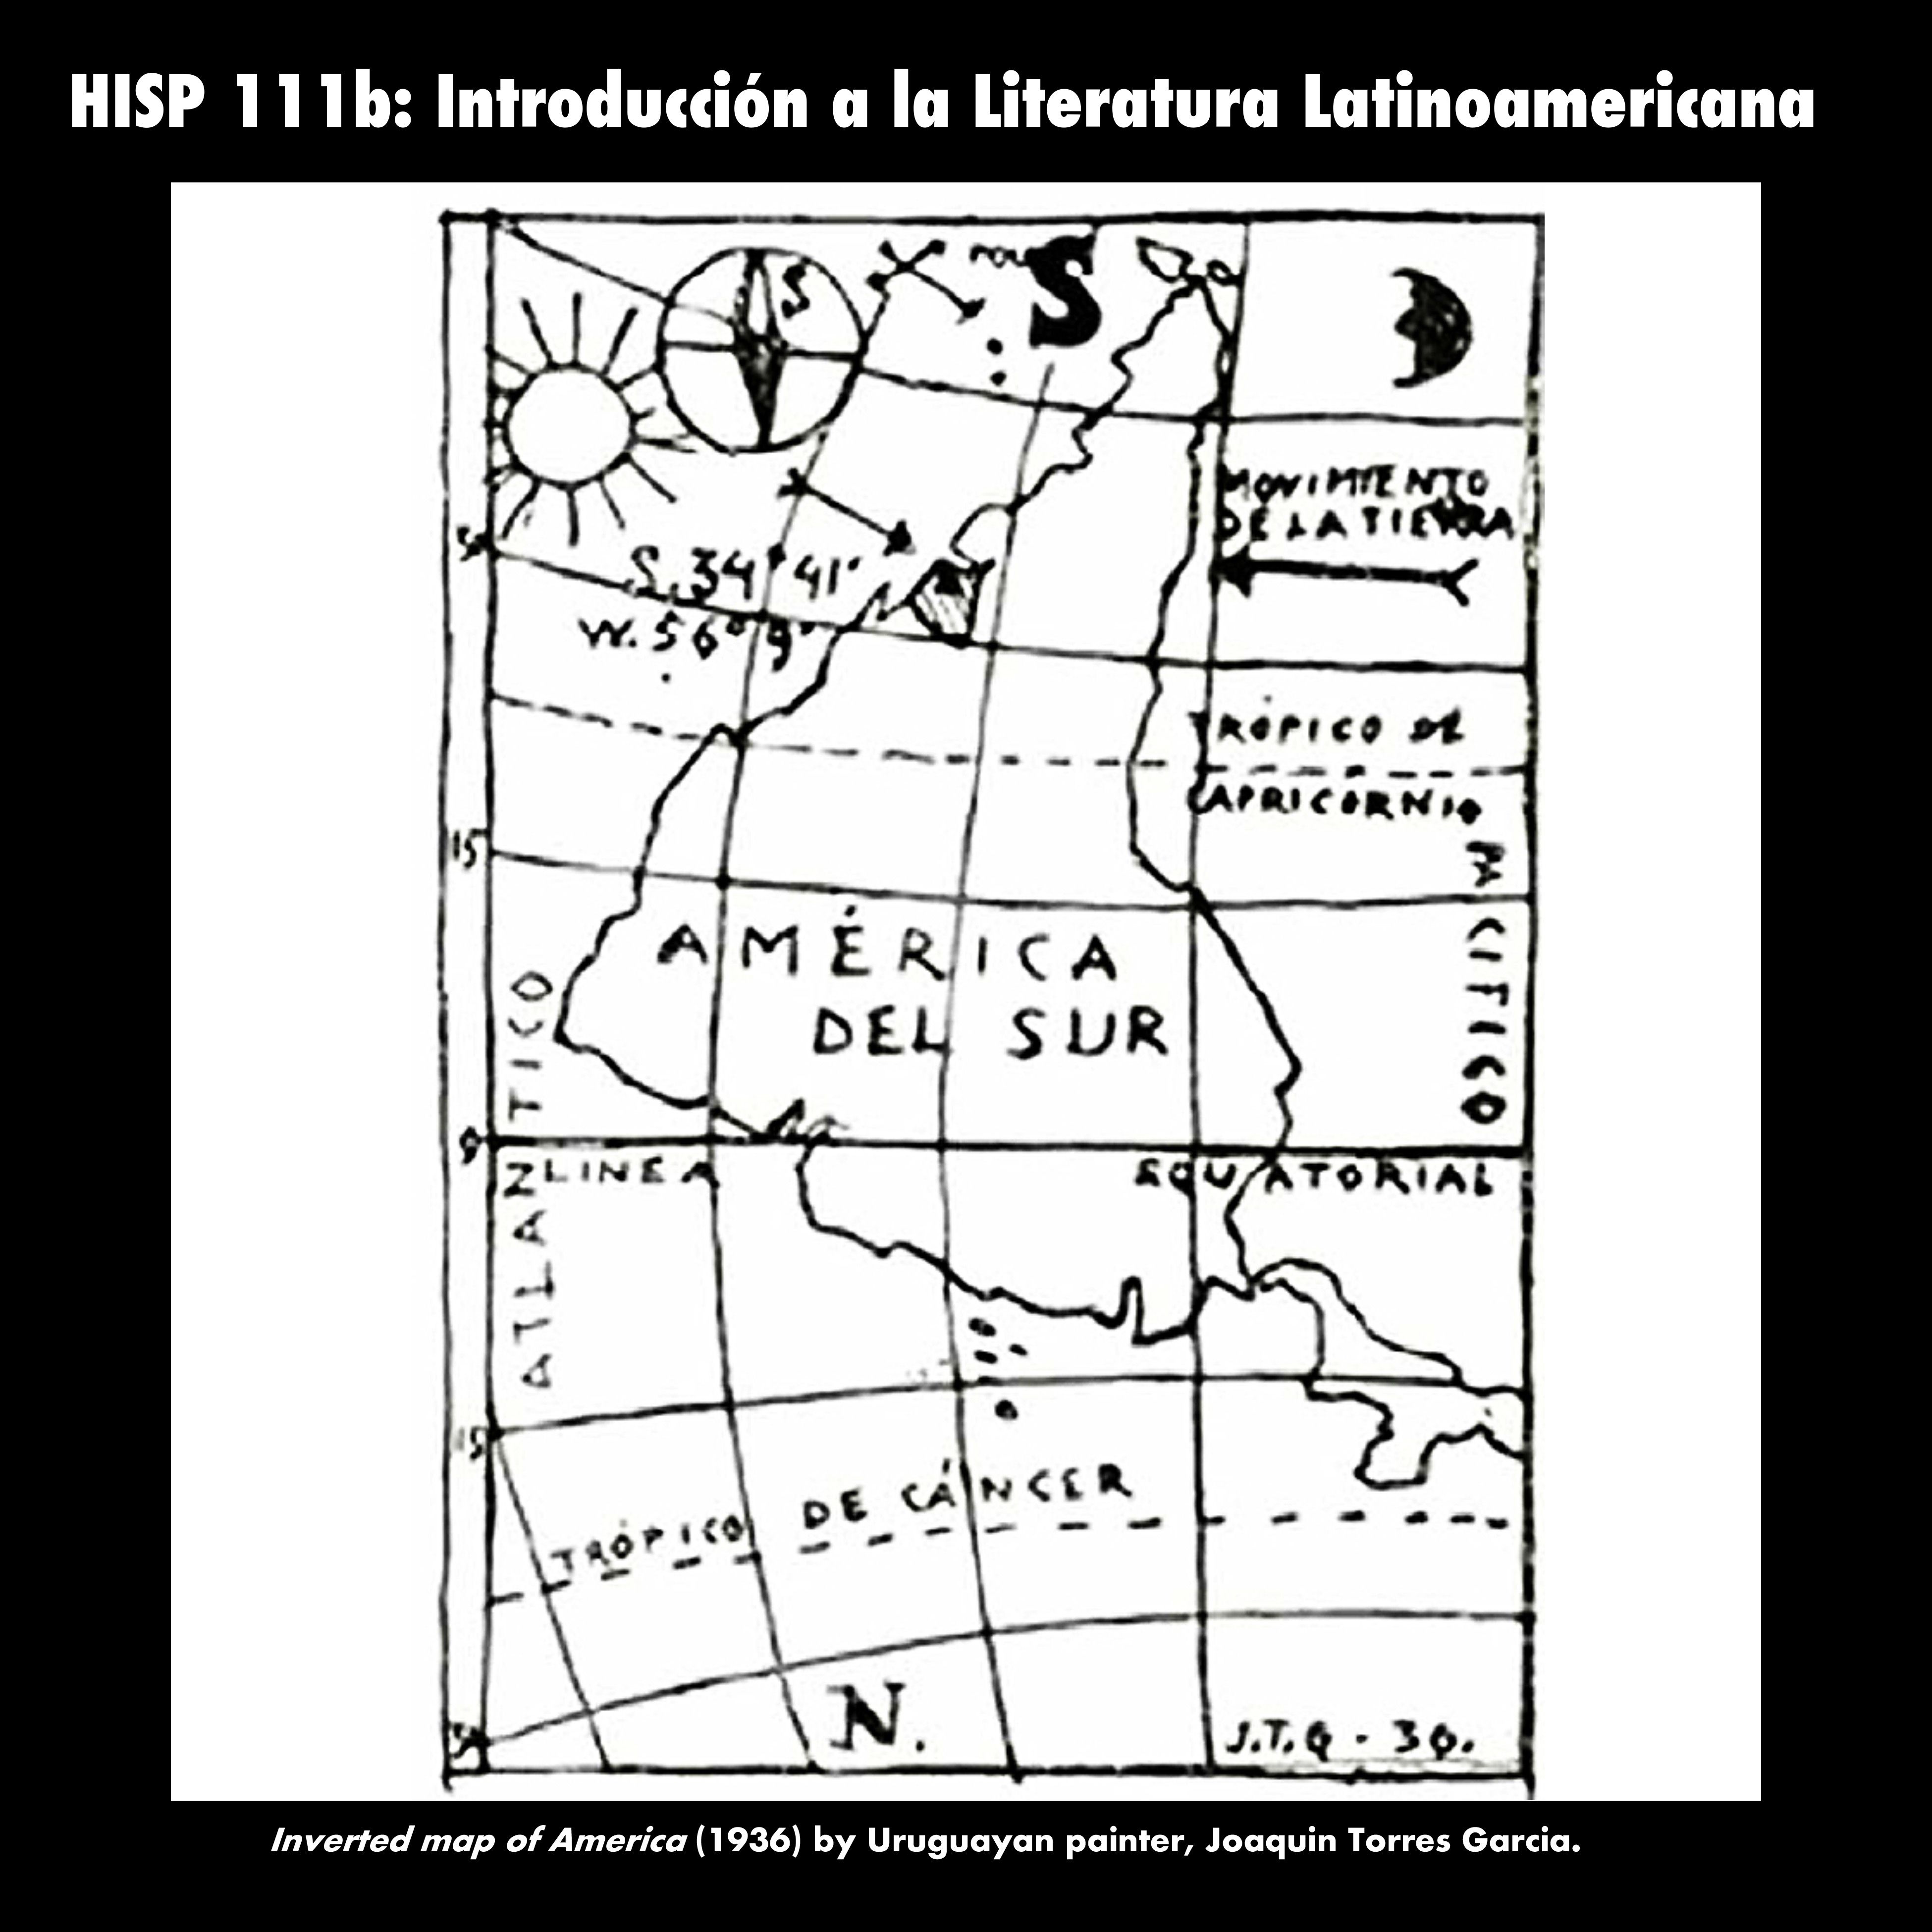 HISP 111b: Introducción a la literatura Latino américana. América del Sur is outlined in black with south at the top of image and north at the bottom. The lettering is right side up. Below image: Inverted map of America (1936) by Uruguayan painter, Joaquin Torres Garcia.